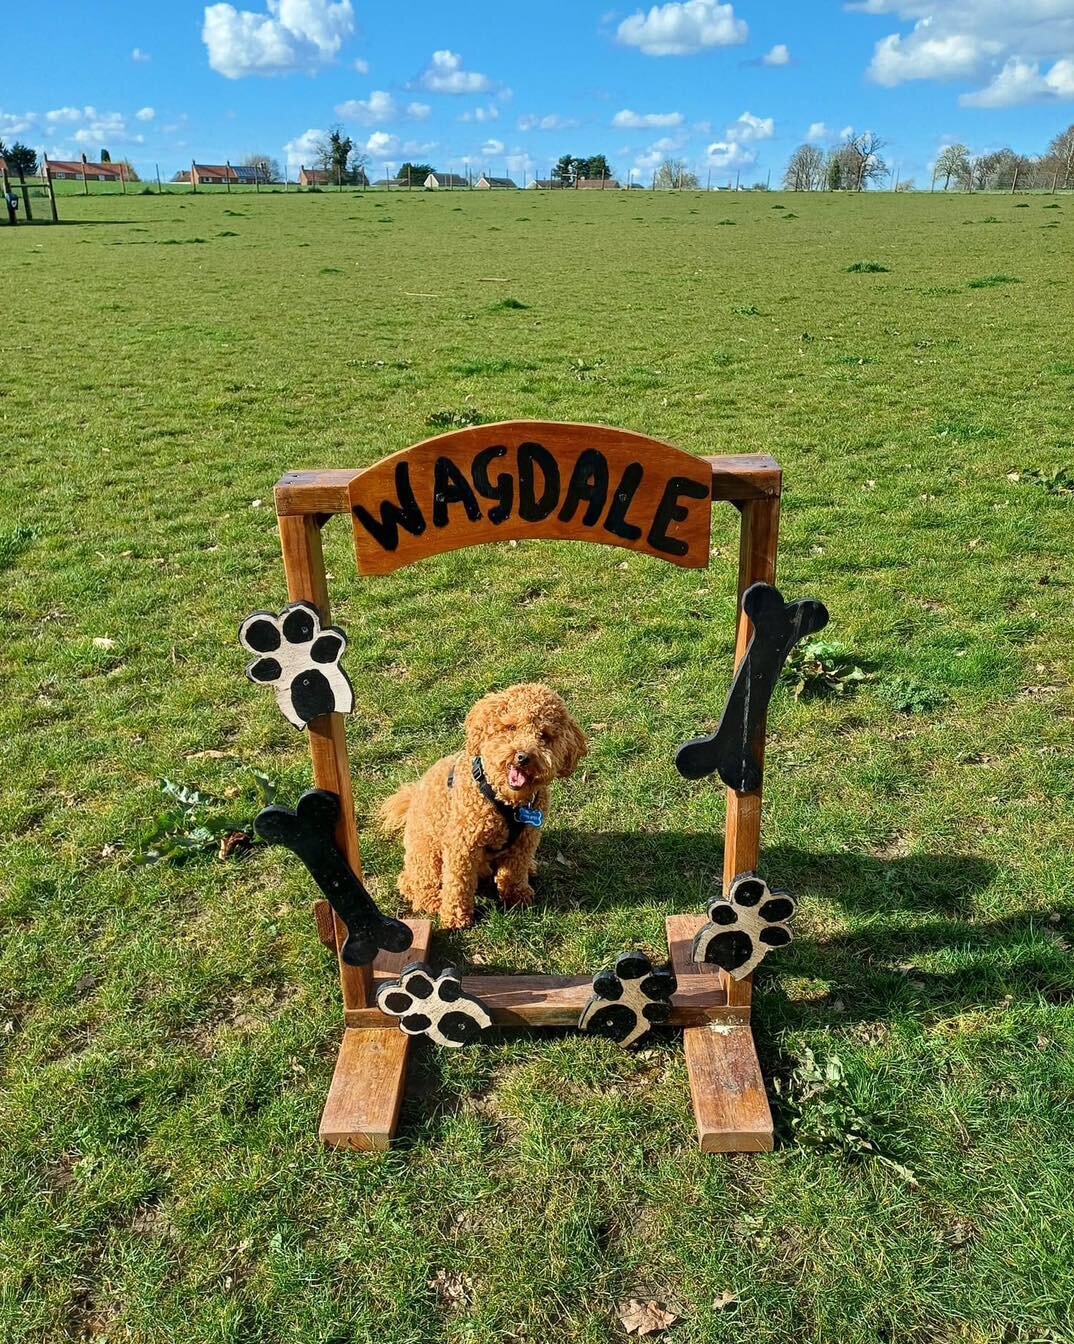 📸 It&rsquo;s Frame It Friday folks, with this cutie 🖼️ 

Time to capture those precious moments with your furry pals 🐾 

Team Wagdale 🐾

For more information or to book the exercise field please click the link in our bio or message us directly!

